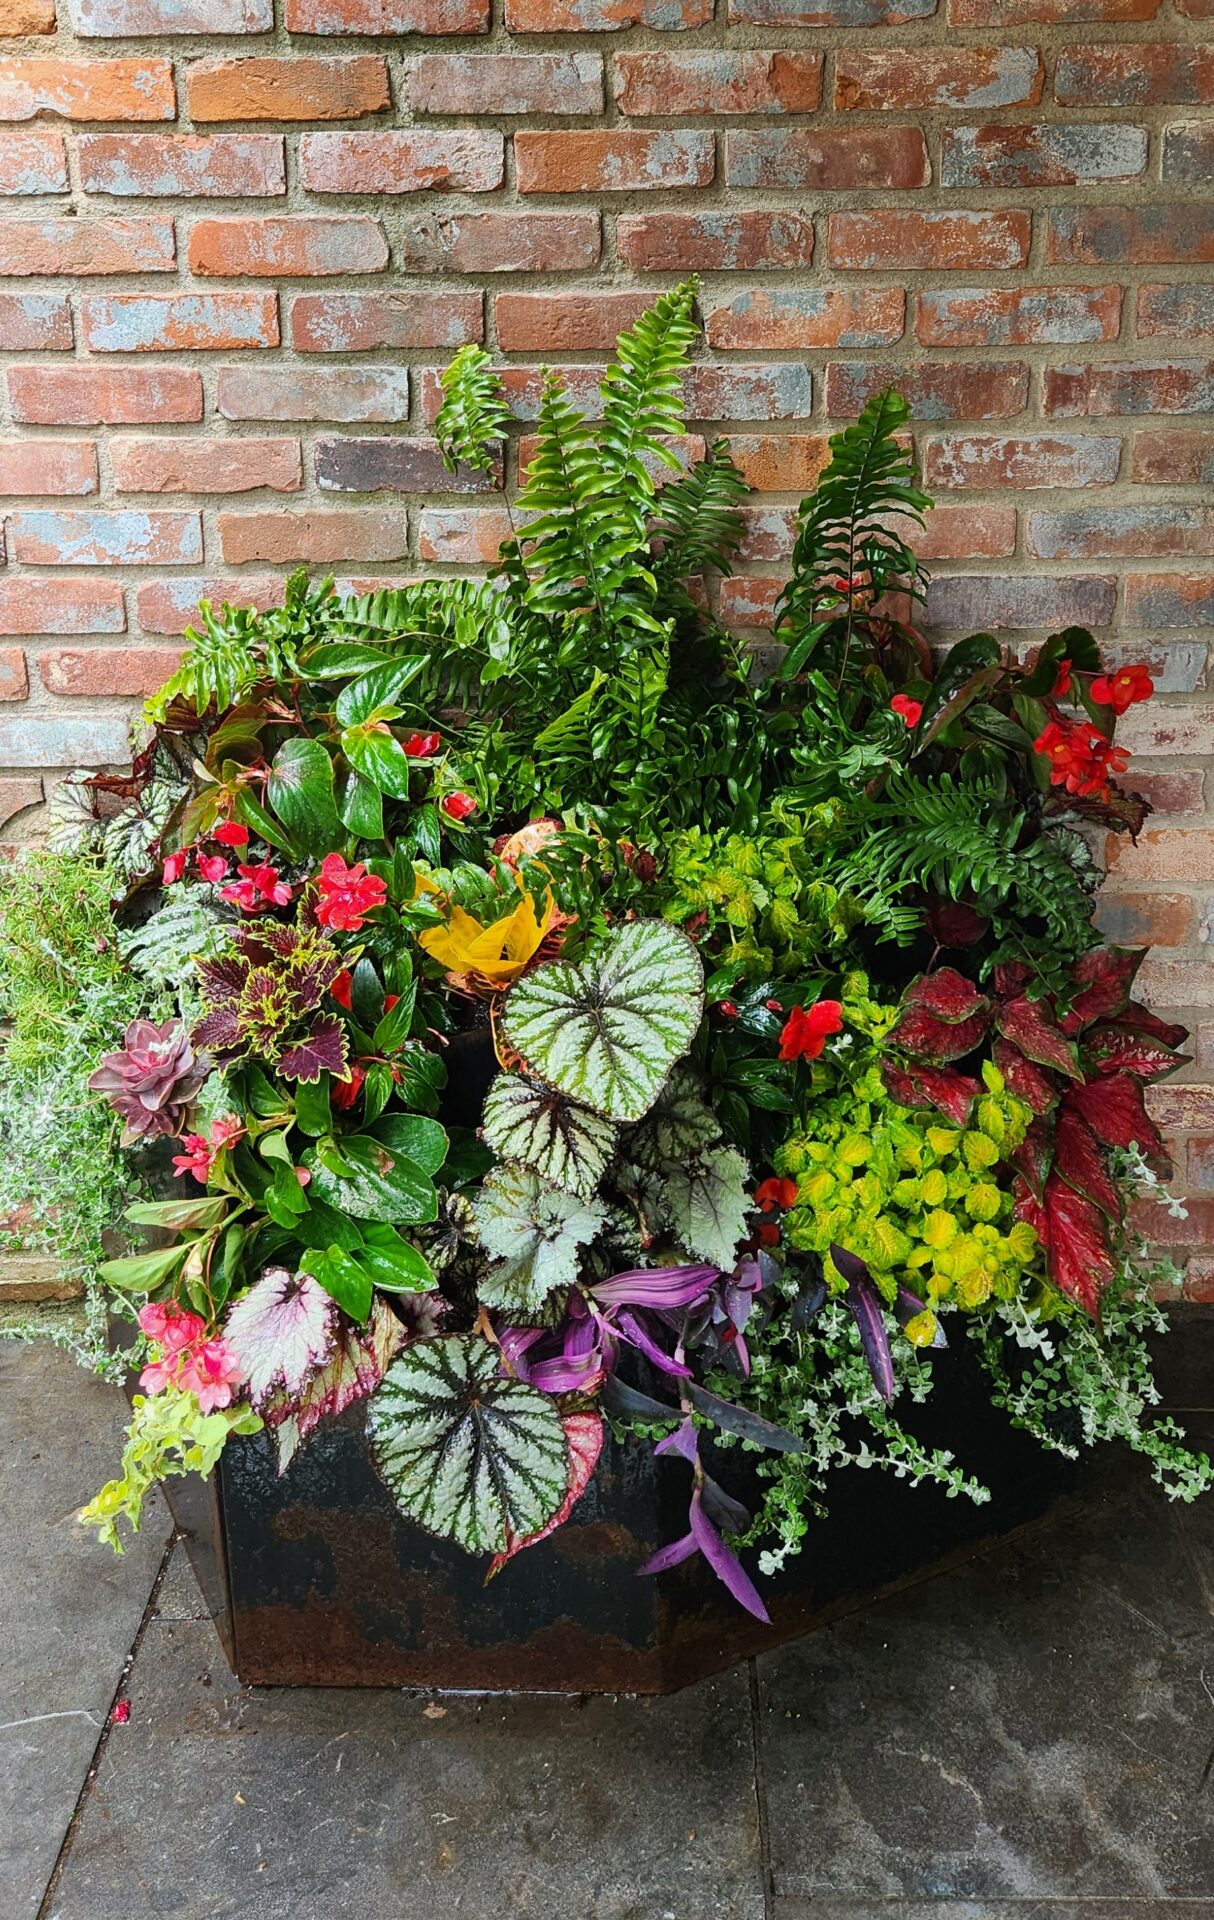 A vibrant planter box with various plants and flowers stands against a brick wall, showcasing a mix of green foliage and colorful blooms.